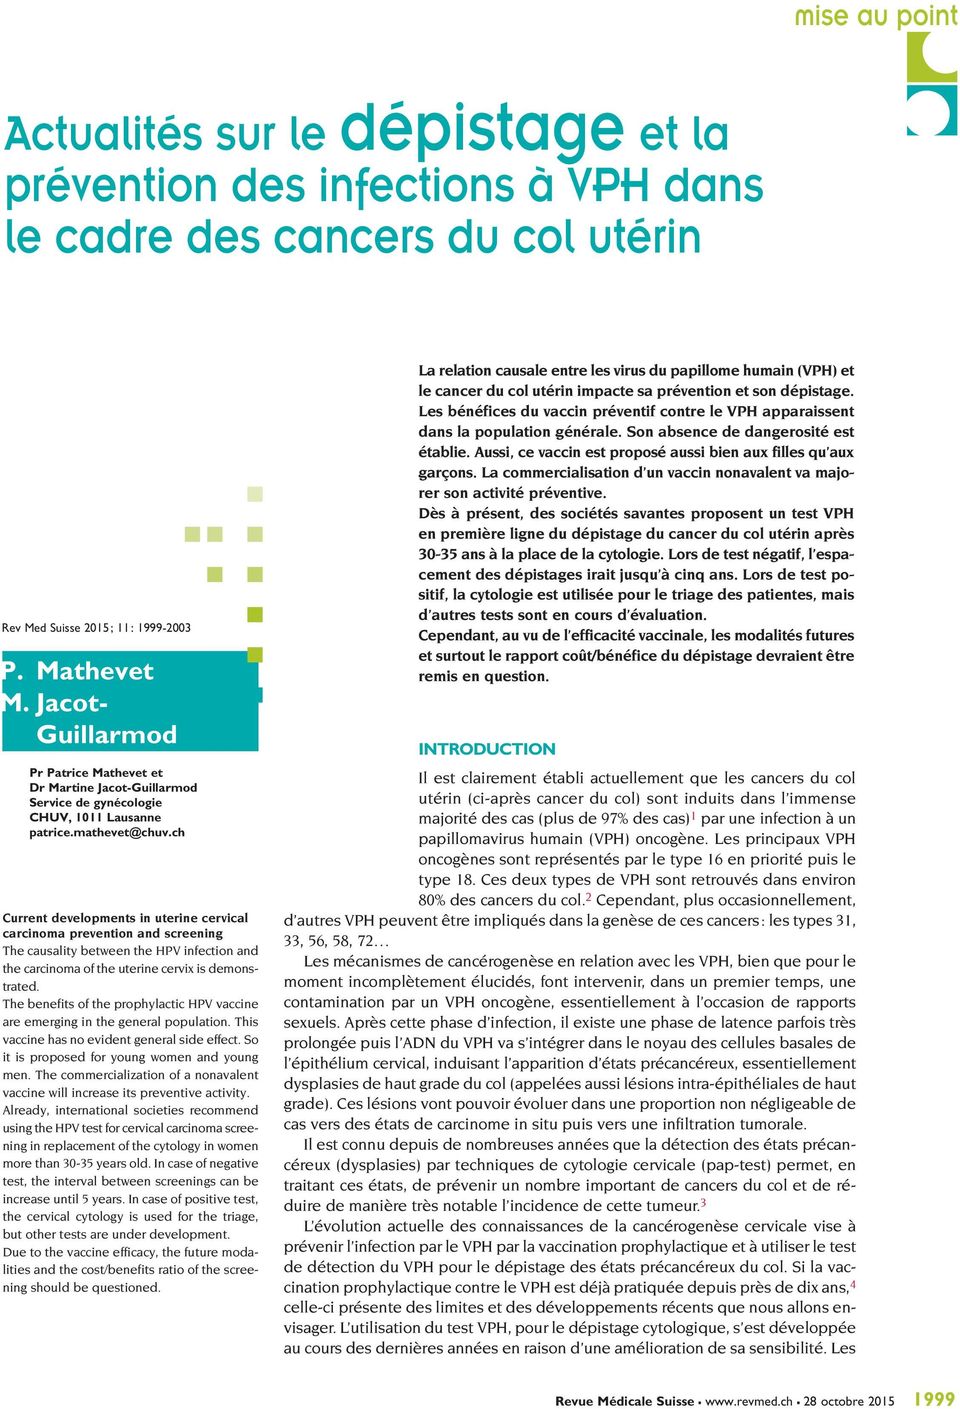 ch Current developments in uterine cervical carcinoma prevention and screening The causality between the HPV infection and the carcinoma of the uterine cervix is demonstrated.